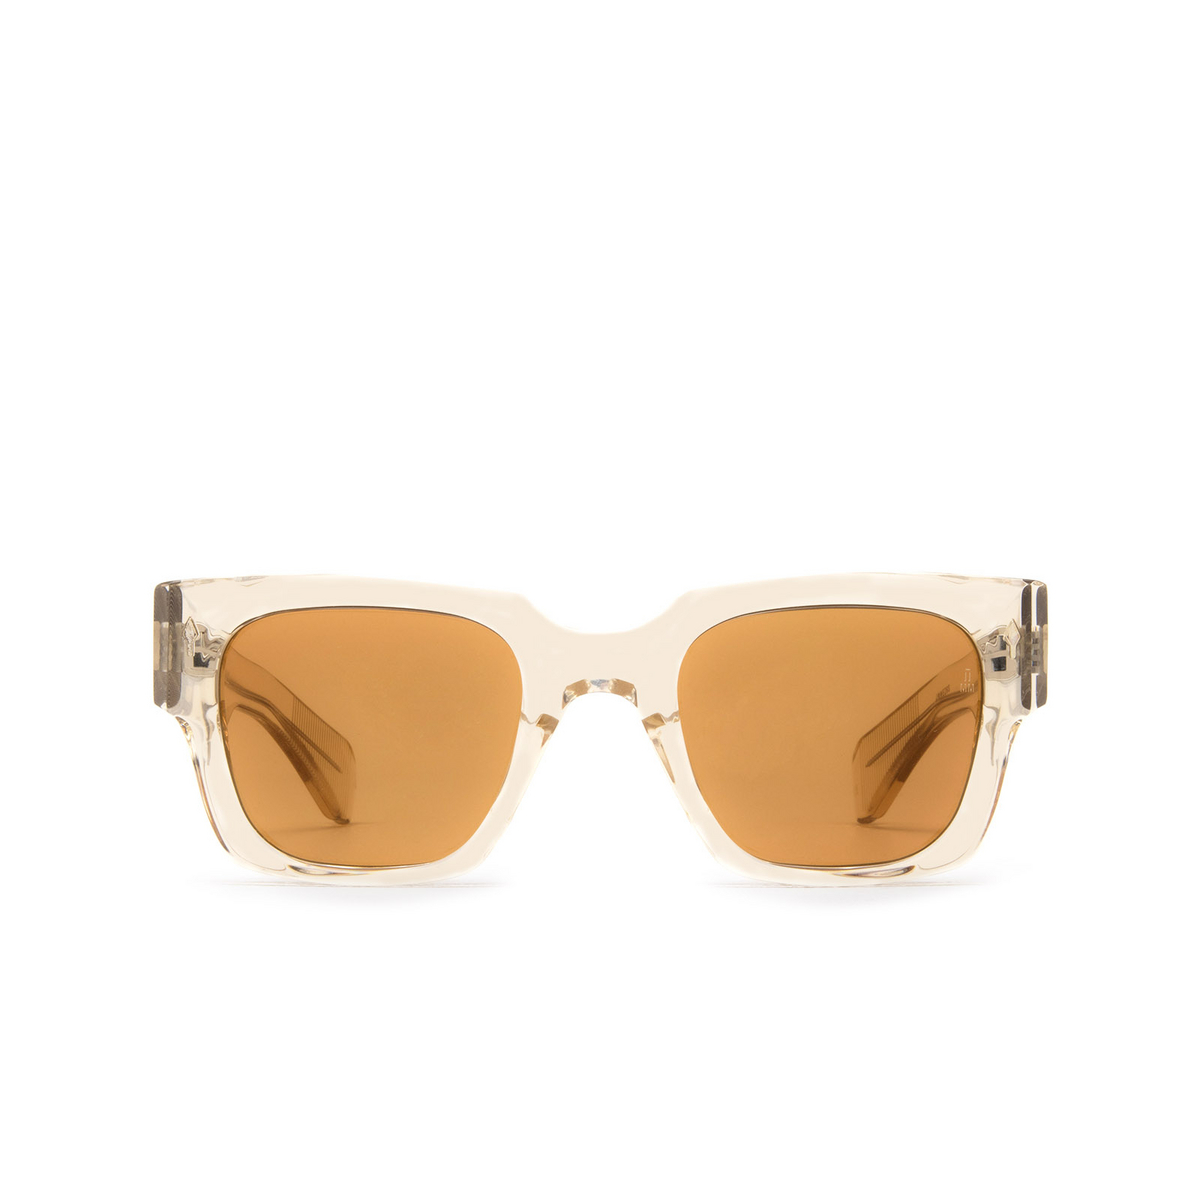 Jacques Marie Mage ENZO Sunglasses BEIGE - front view